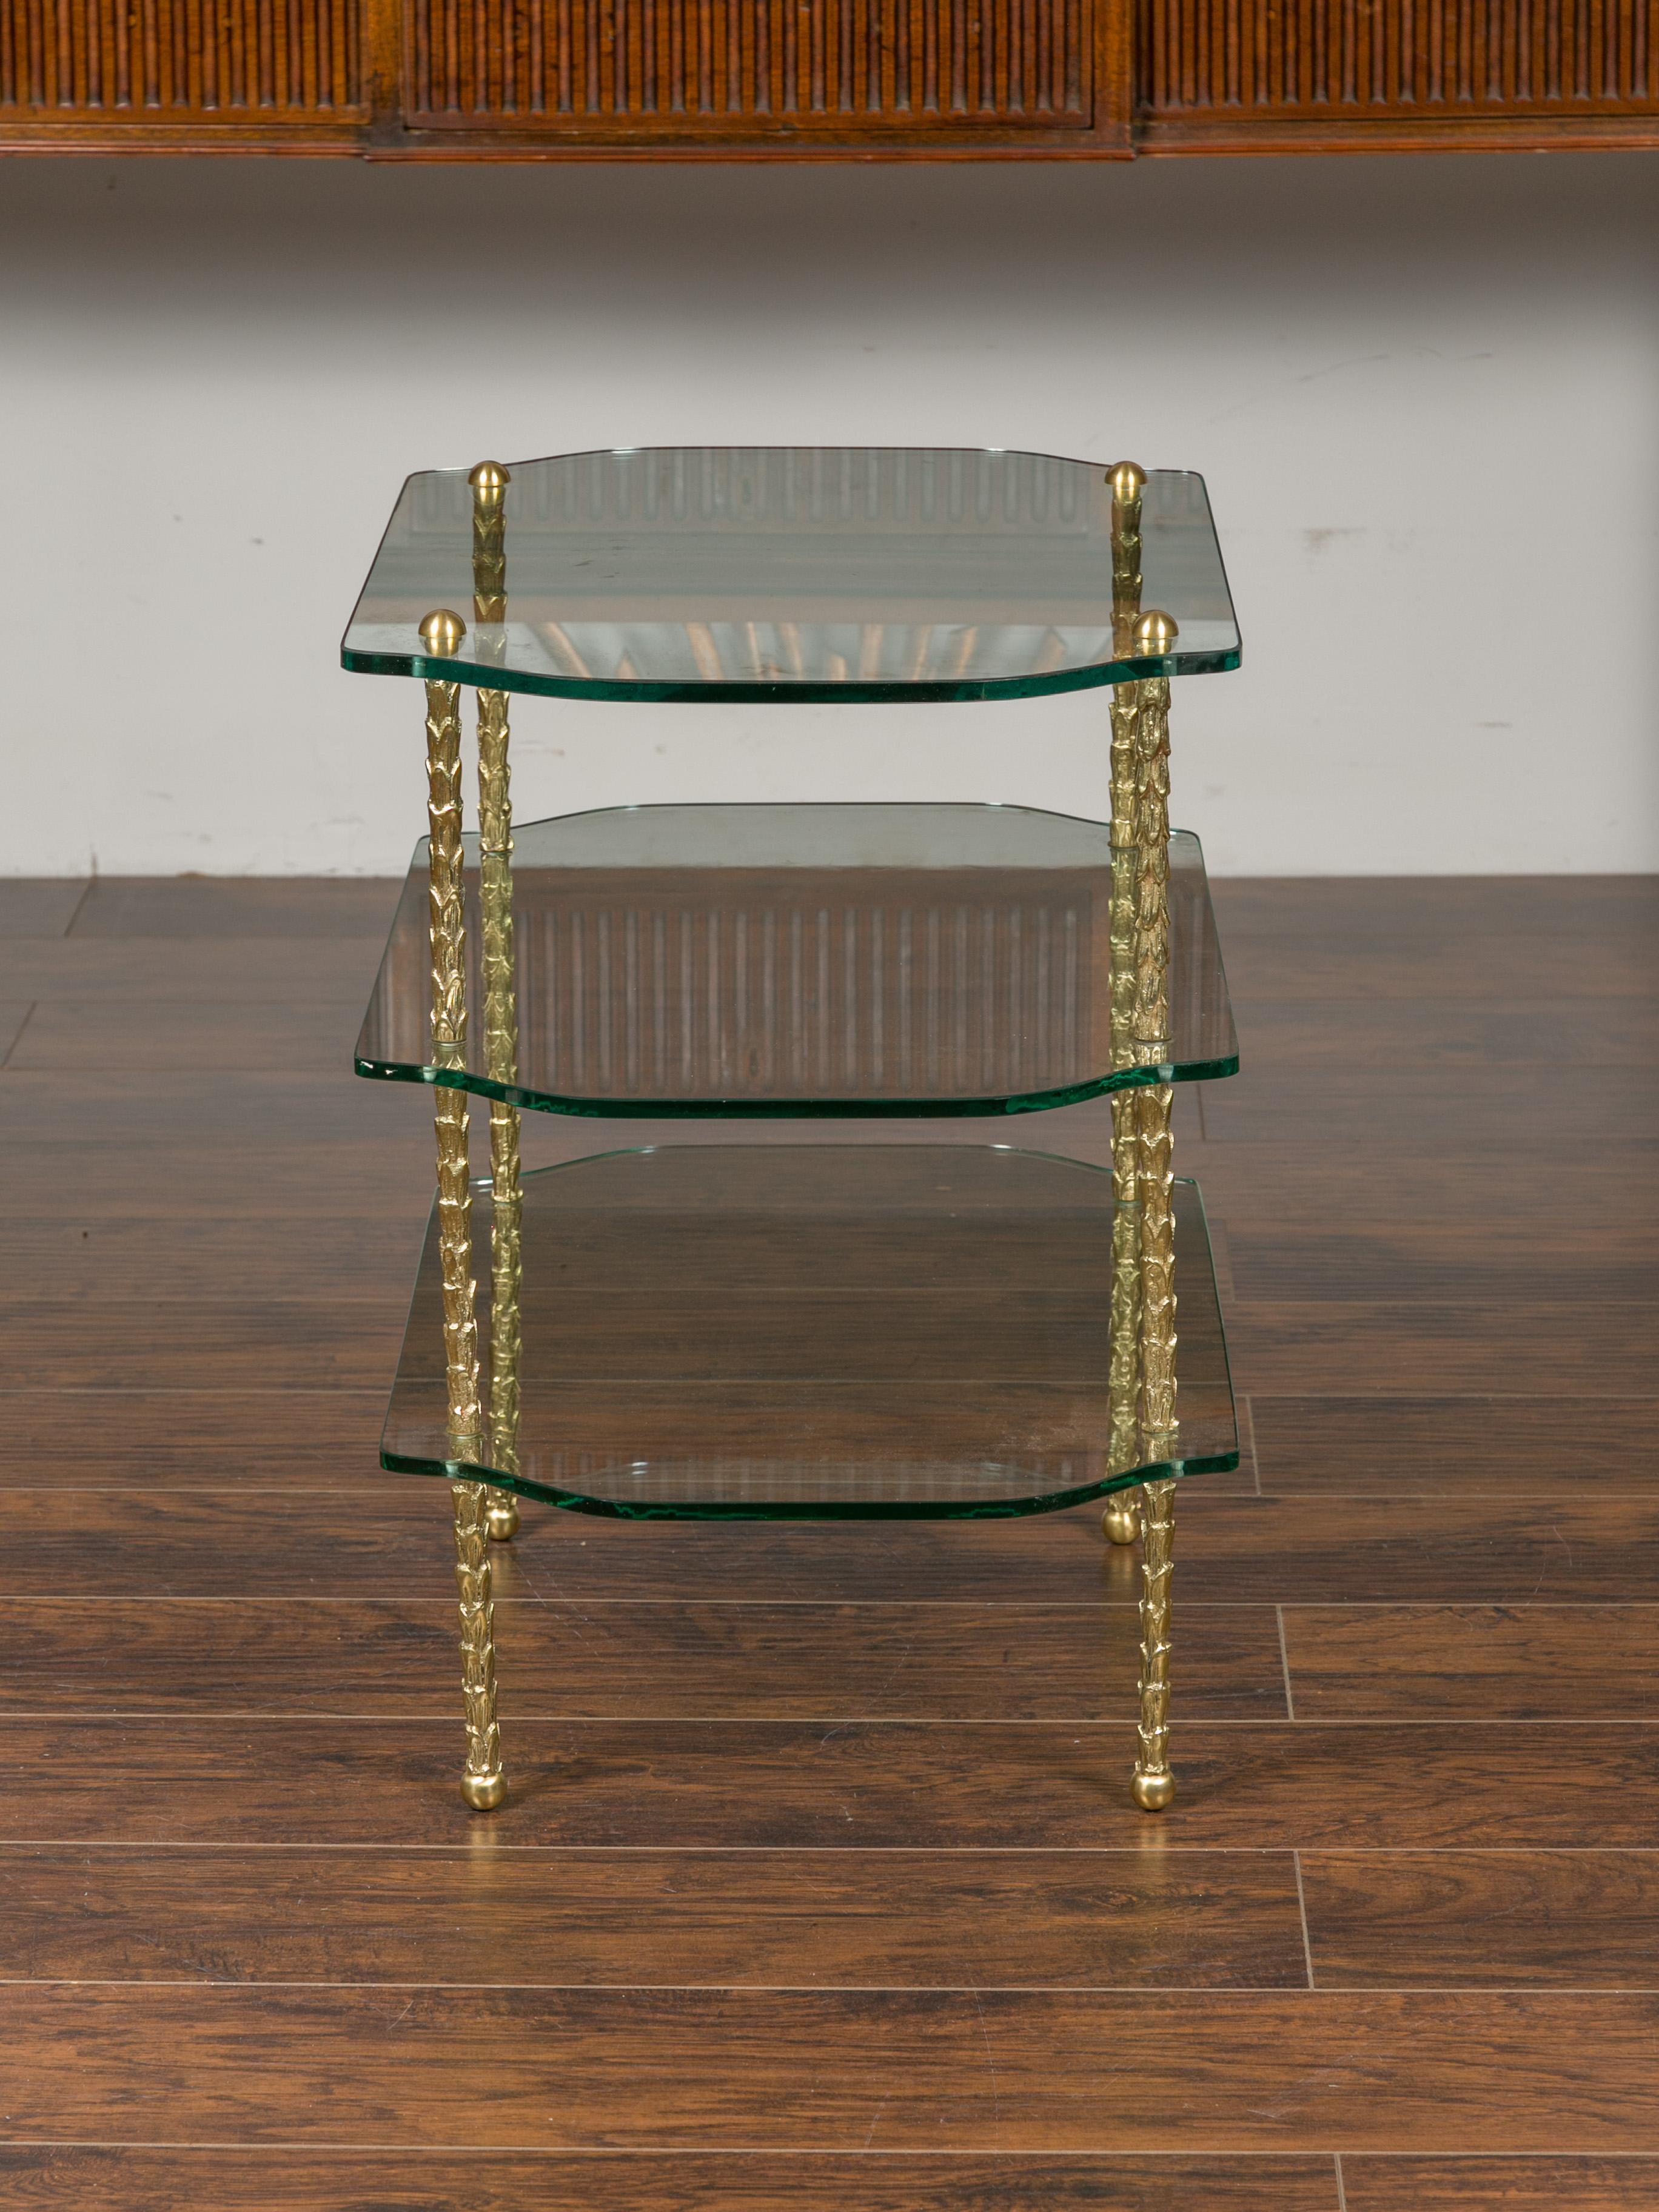 Midcentury Brass Three-Tiered Table with Glass Shelves and Foliage Motifs For Sale 4